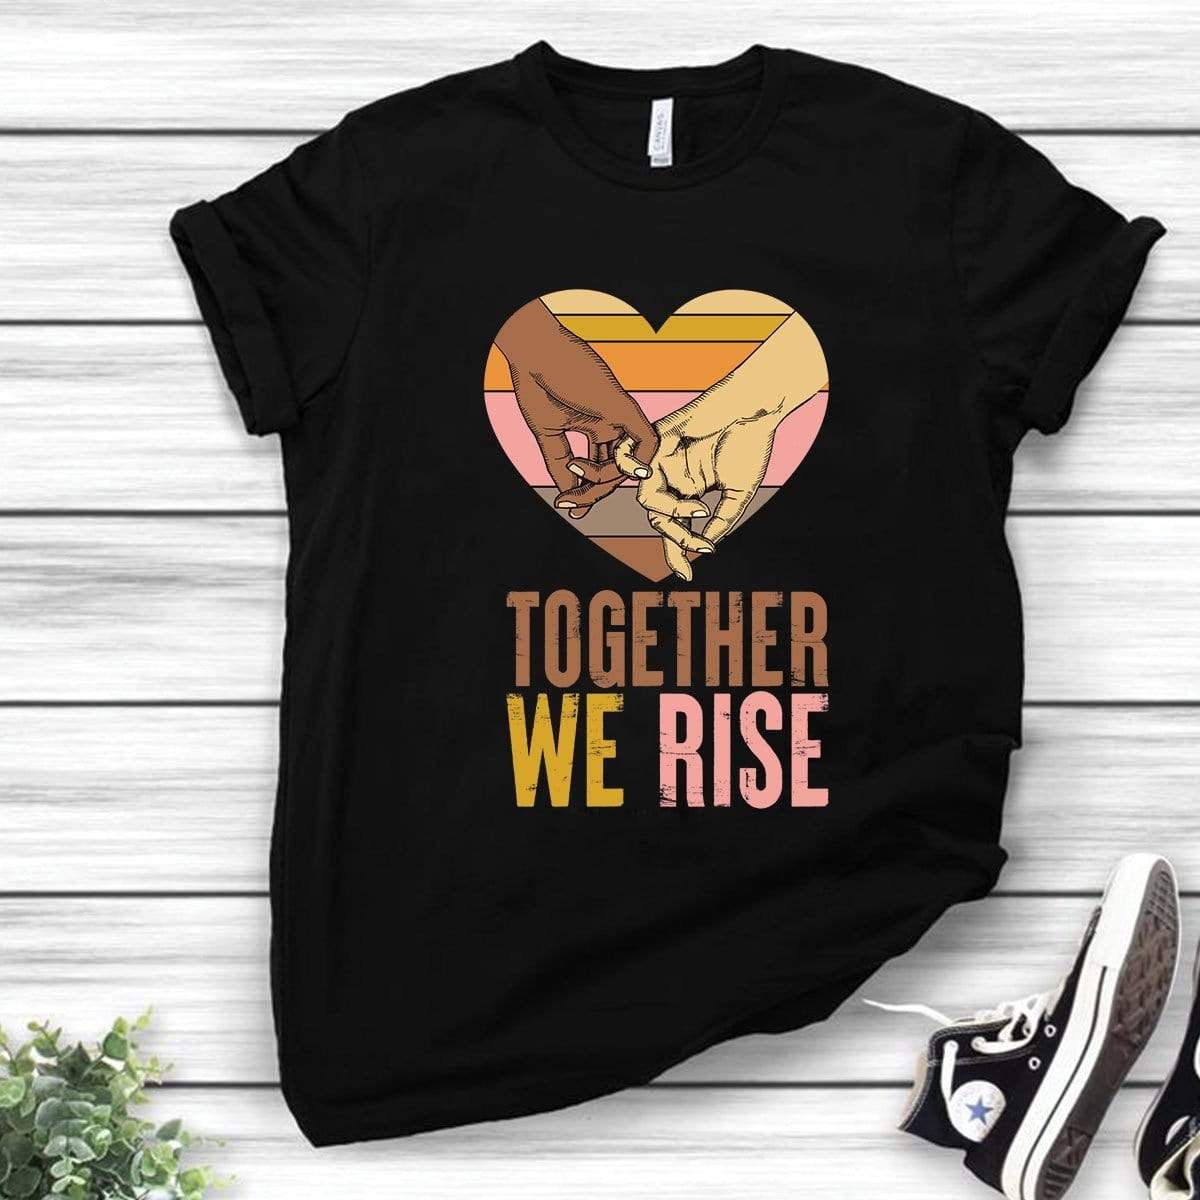 Together We Rise Shirt